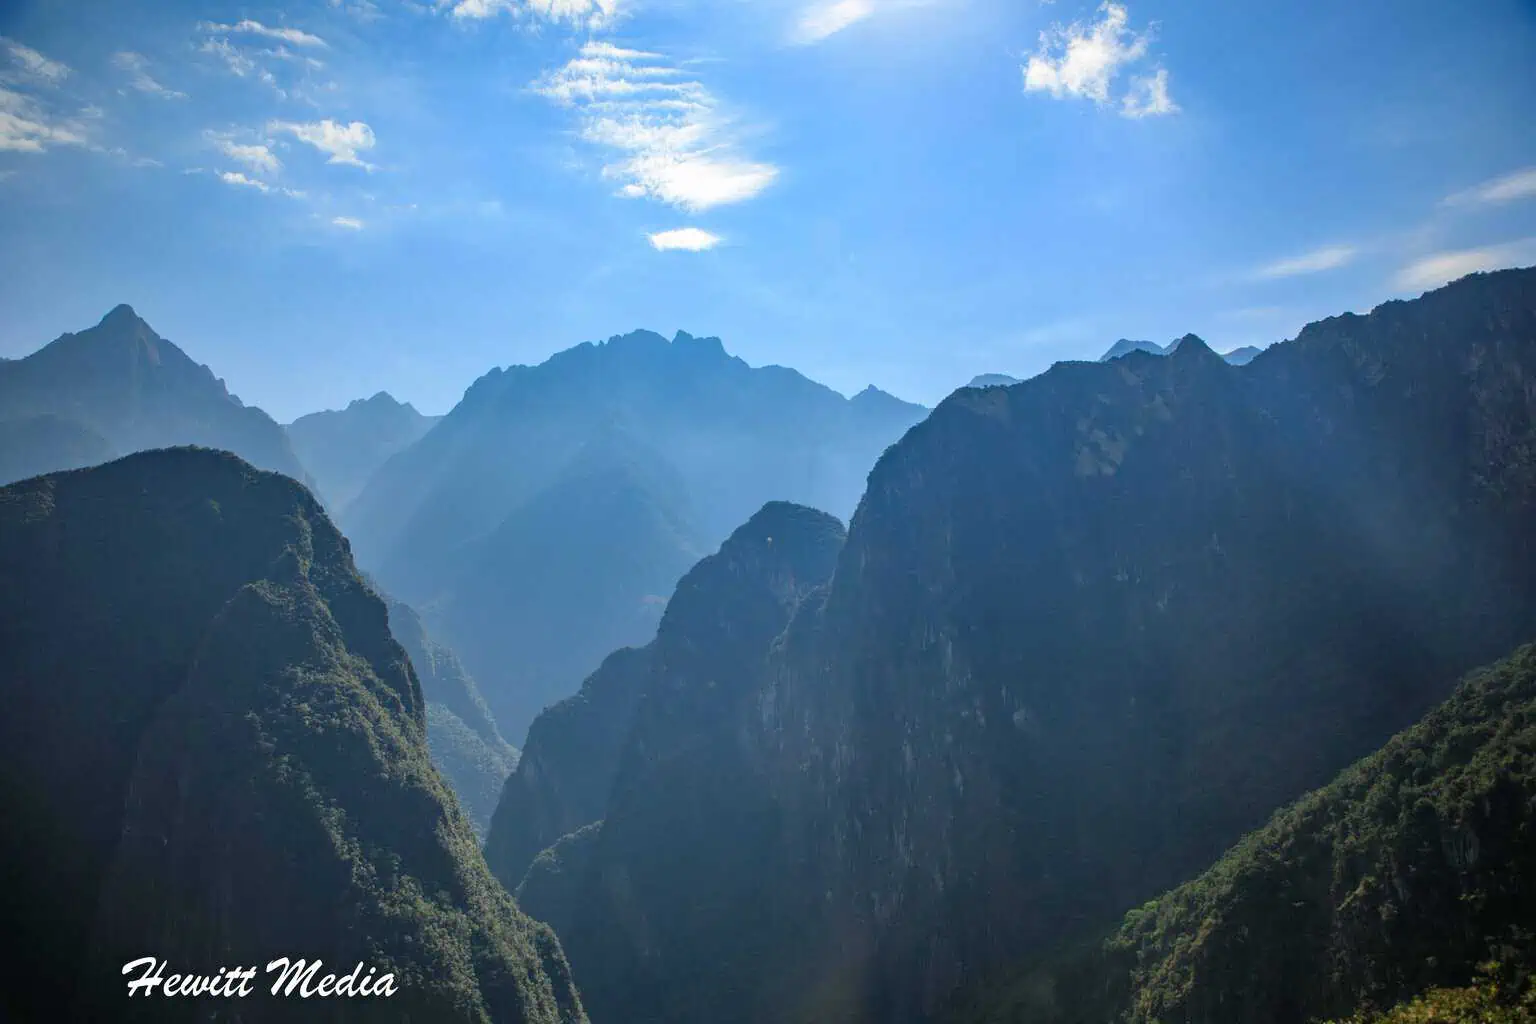 Machu Picchu Visitor Guide - The Andes Mountains